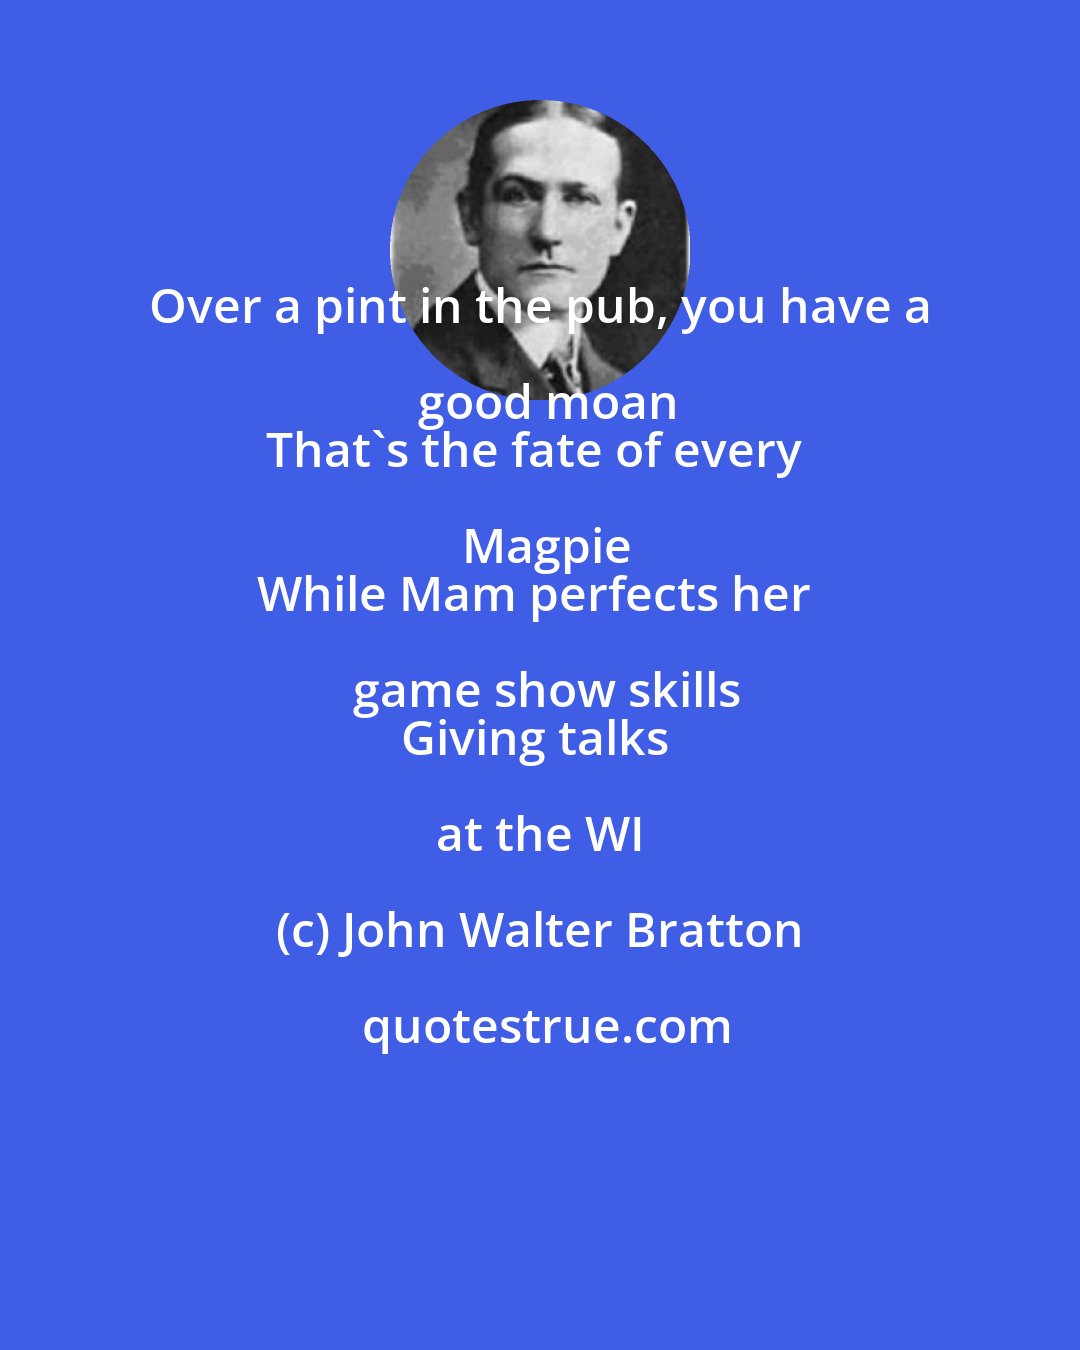 John Walter Bratton: Over a pint in the pub, you have a good moan
That's the fate of every Magpie
While Mam perfects her game show skills
Giving talks at the WI